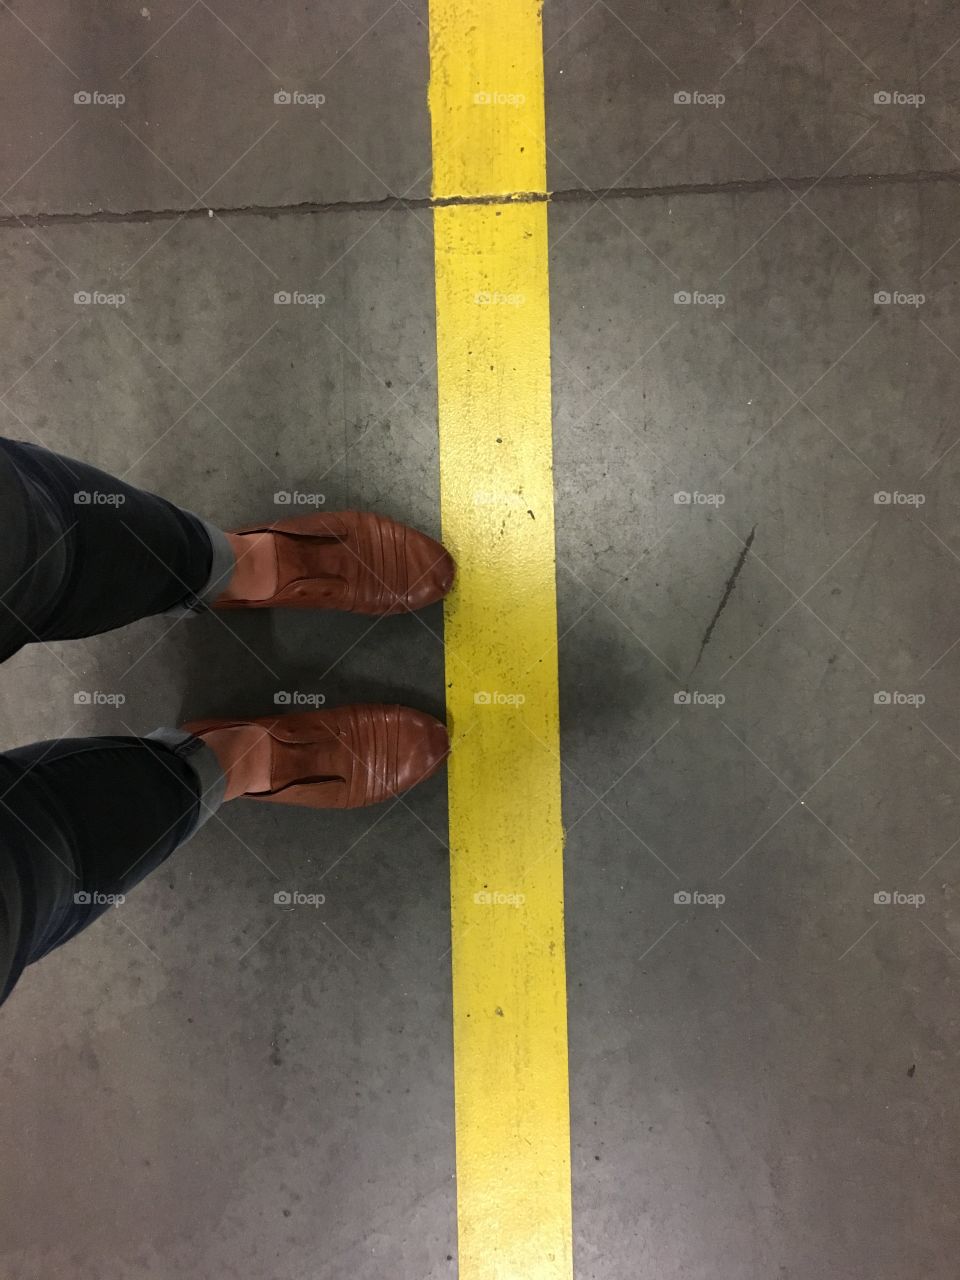 toe the line...